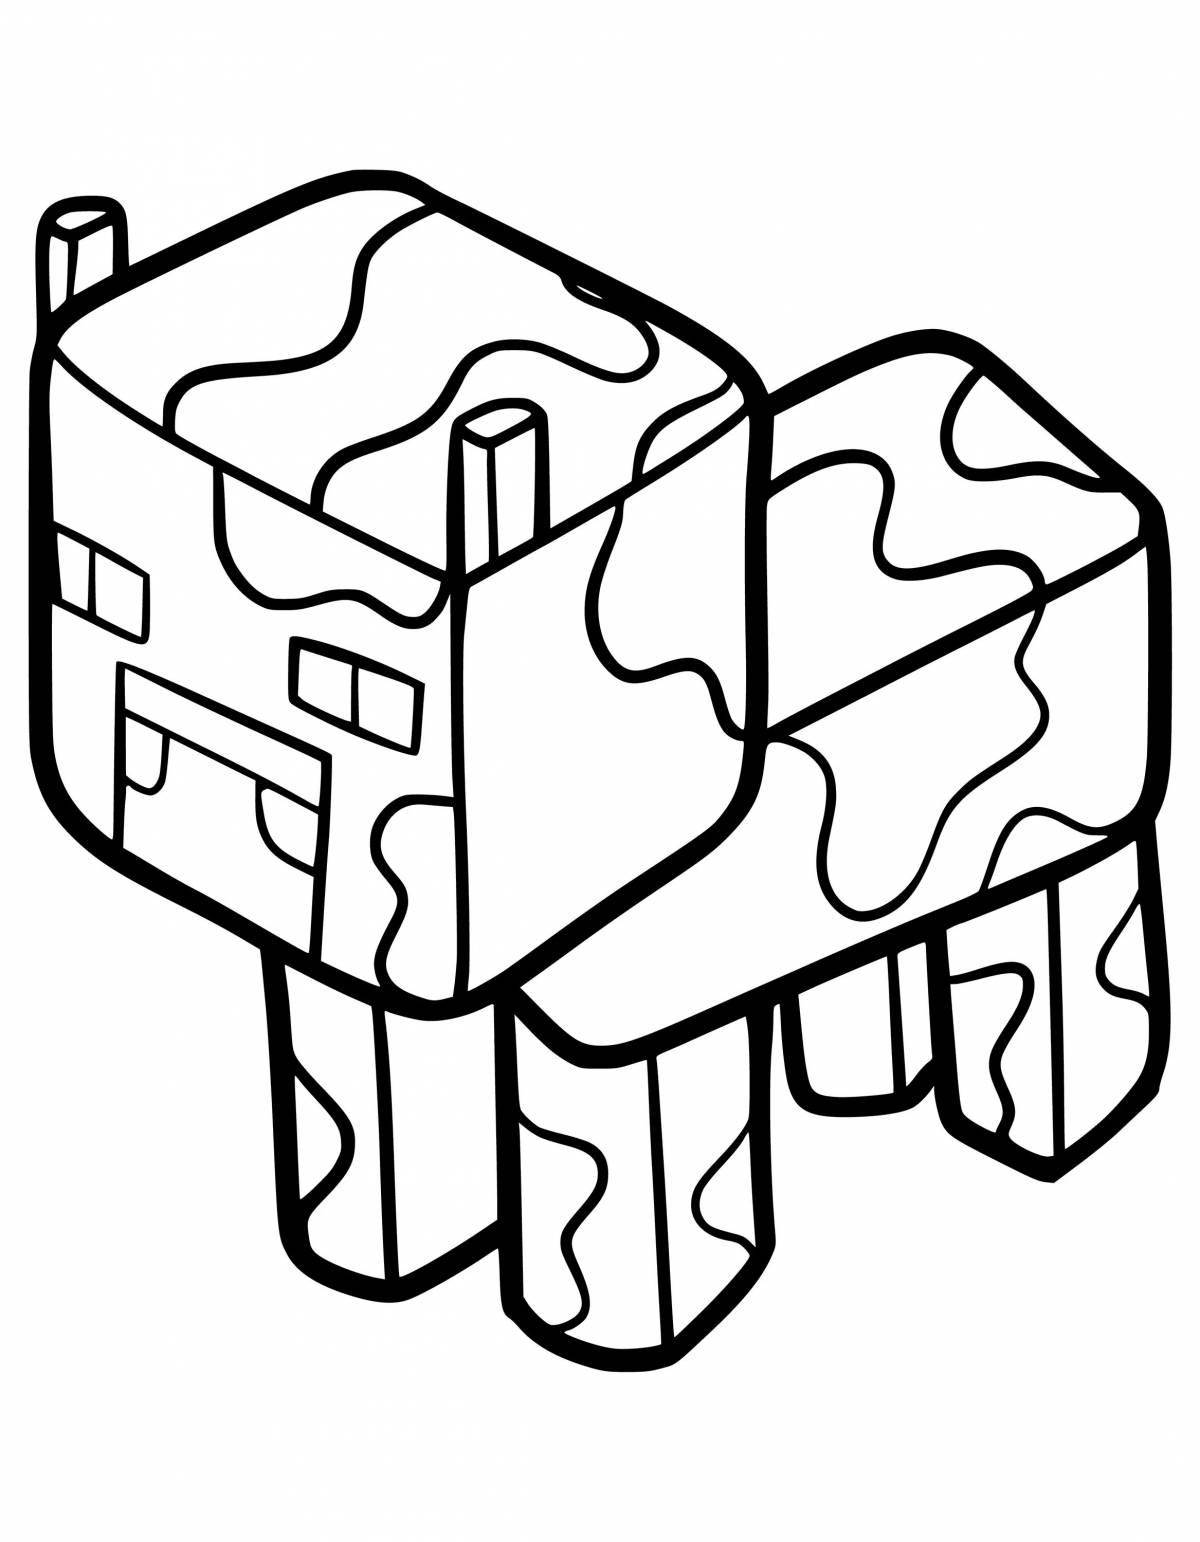 Funny minecraft horse coloring page